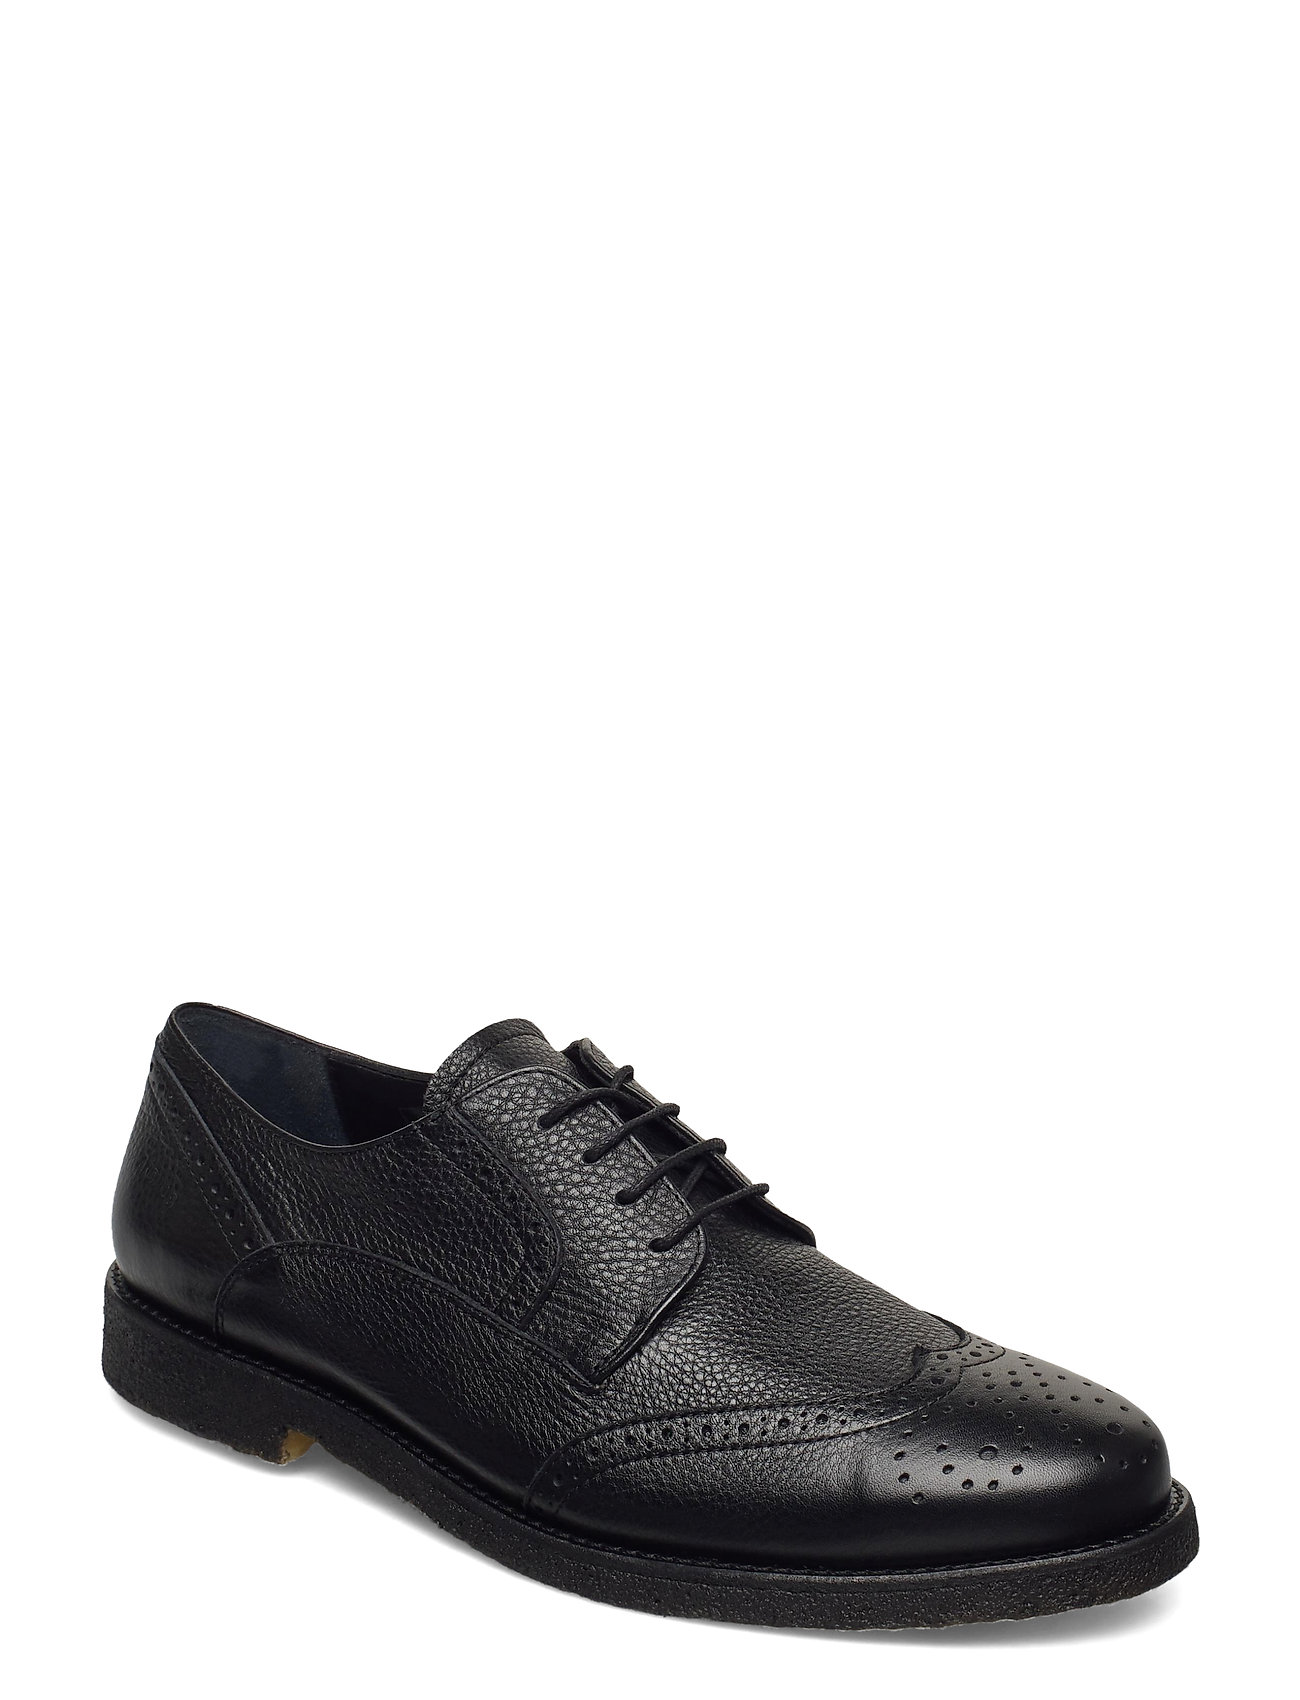 ANGULUS sko – Shoes - Flat - With Lace Shoes Business Laced Shoes Sort til herre i Sort - Pashion.dk